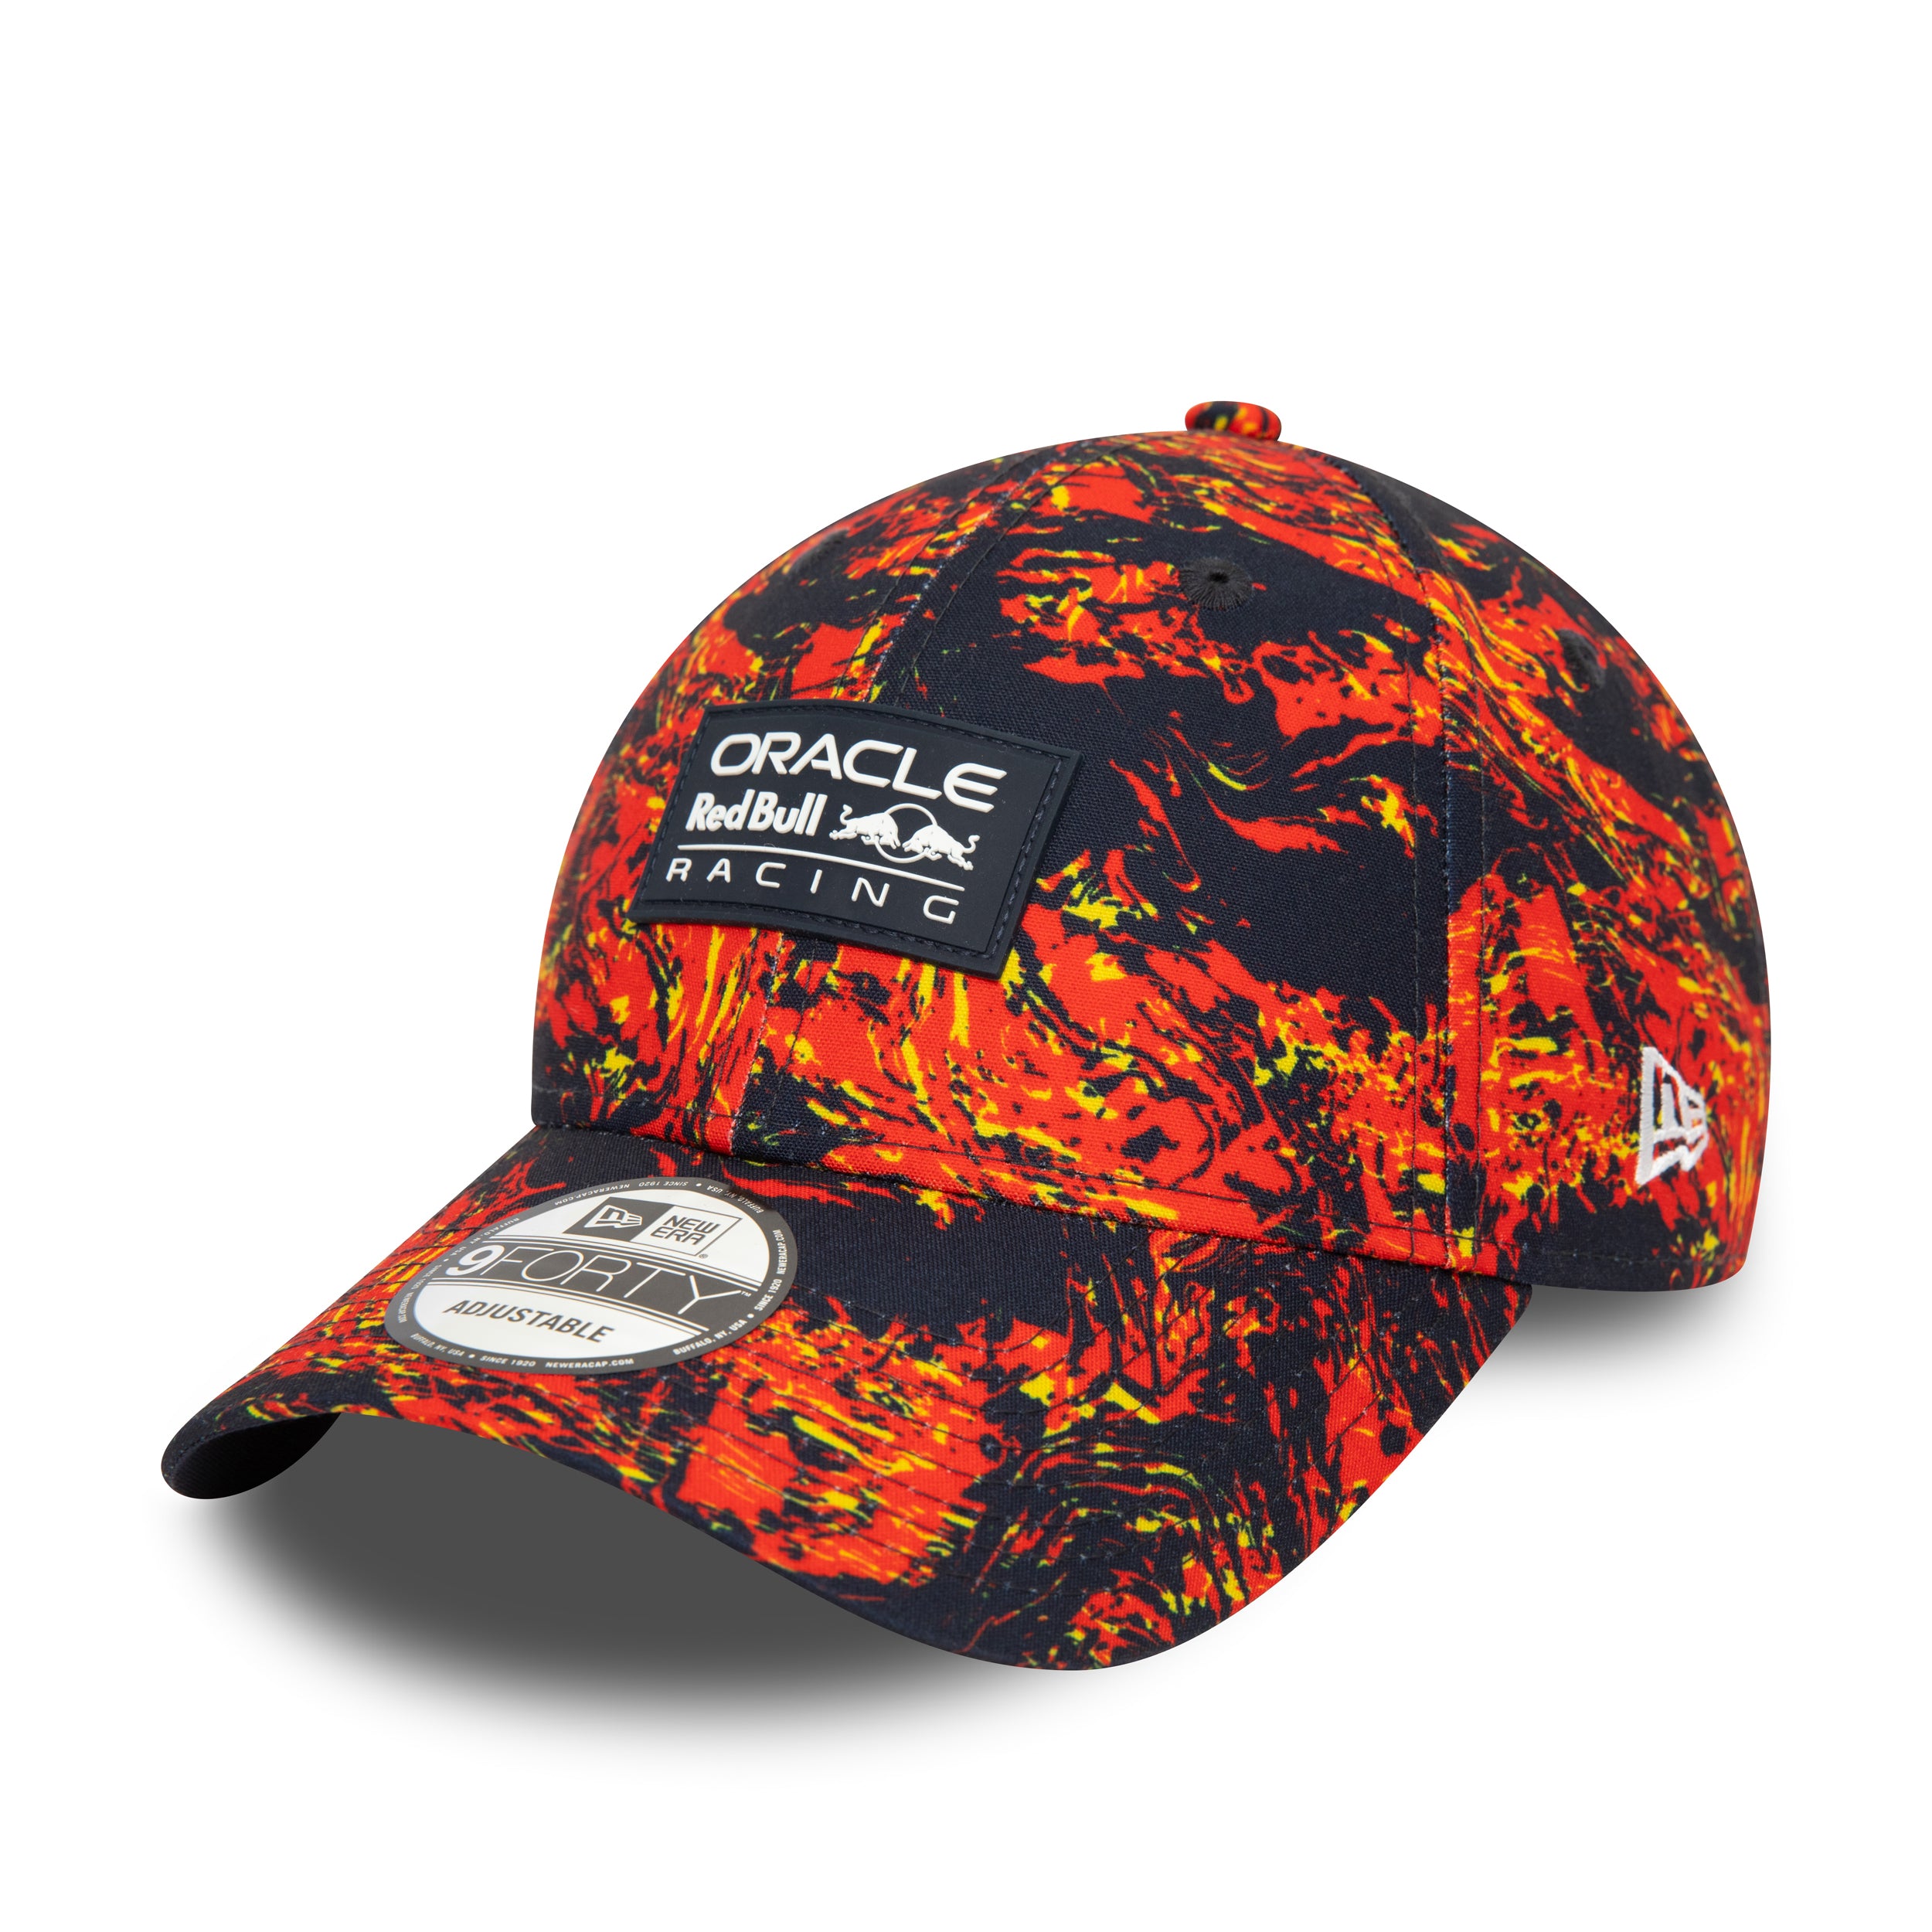 Red Bull Racing All Over Print Adjustable Cap Multicolor